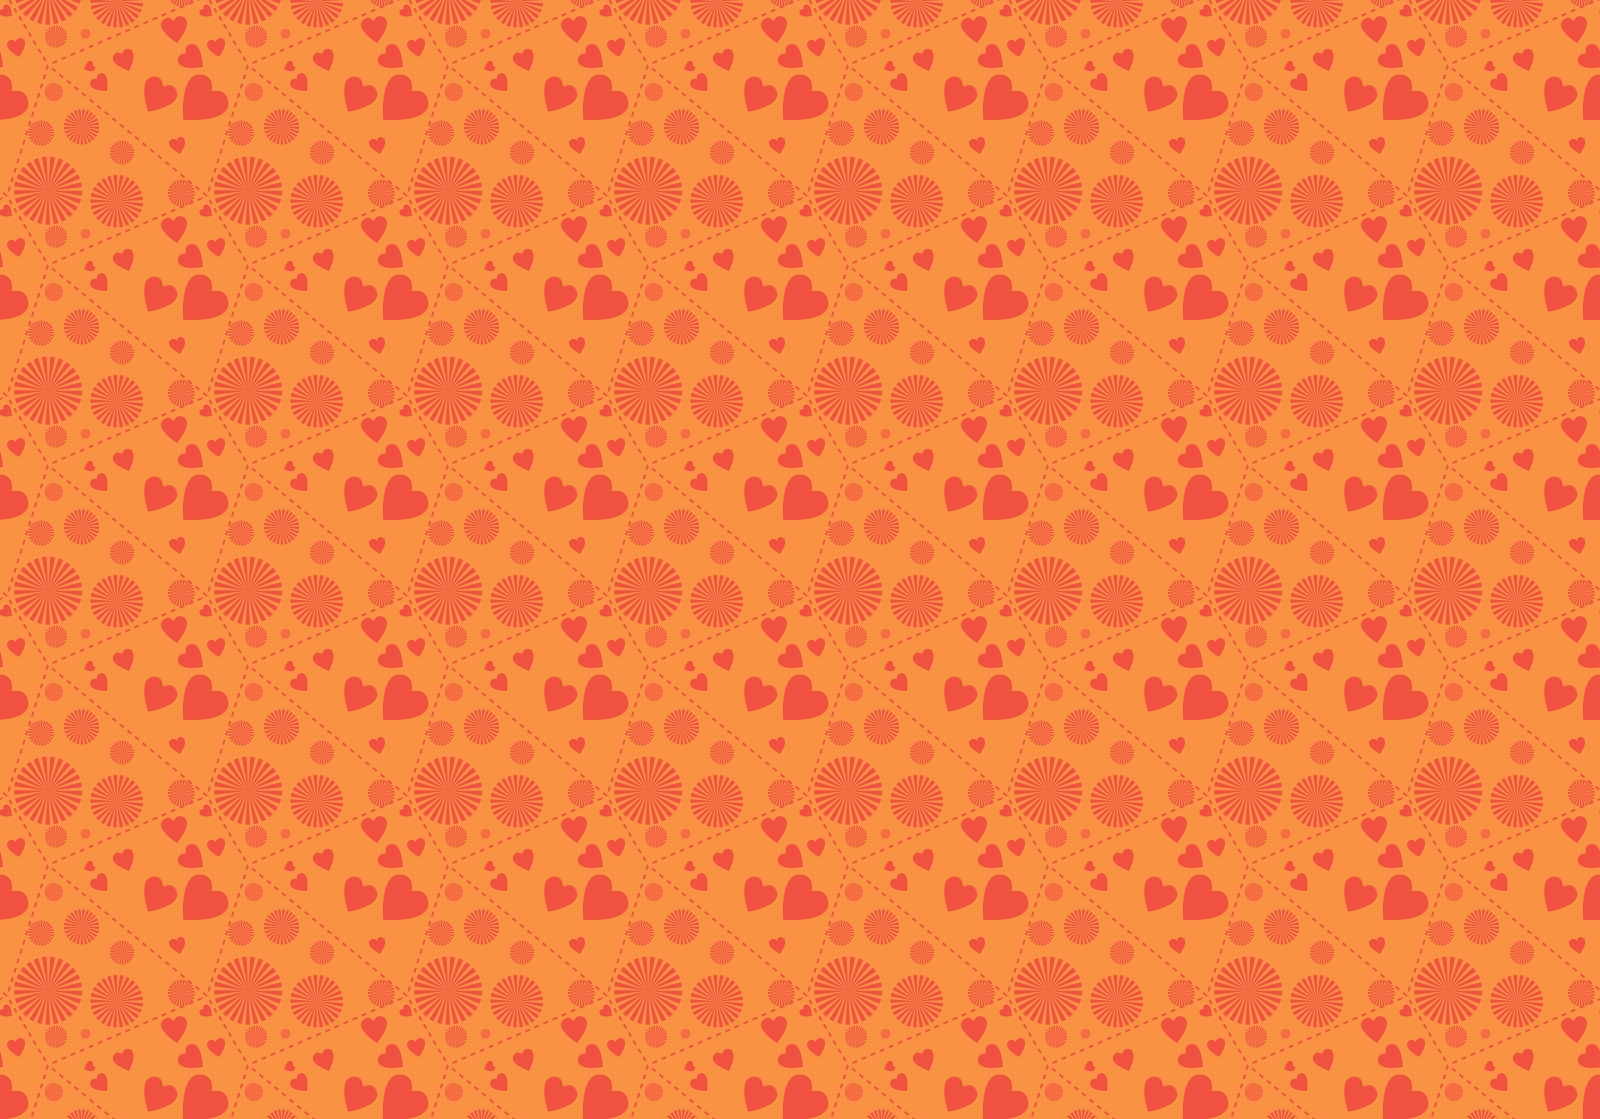 background, hearts, orange, circles, texture, textures Full HD